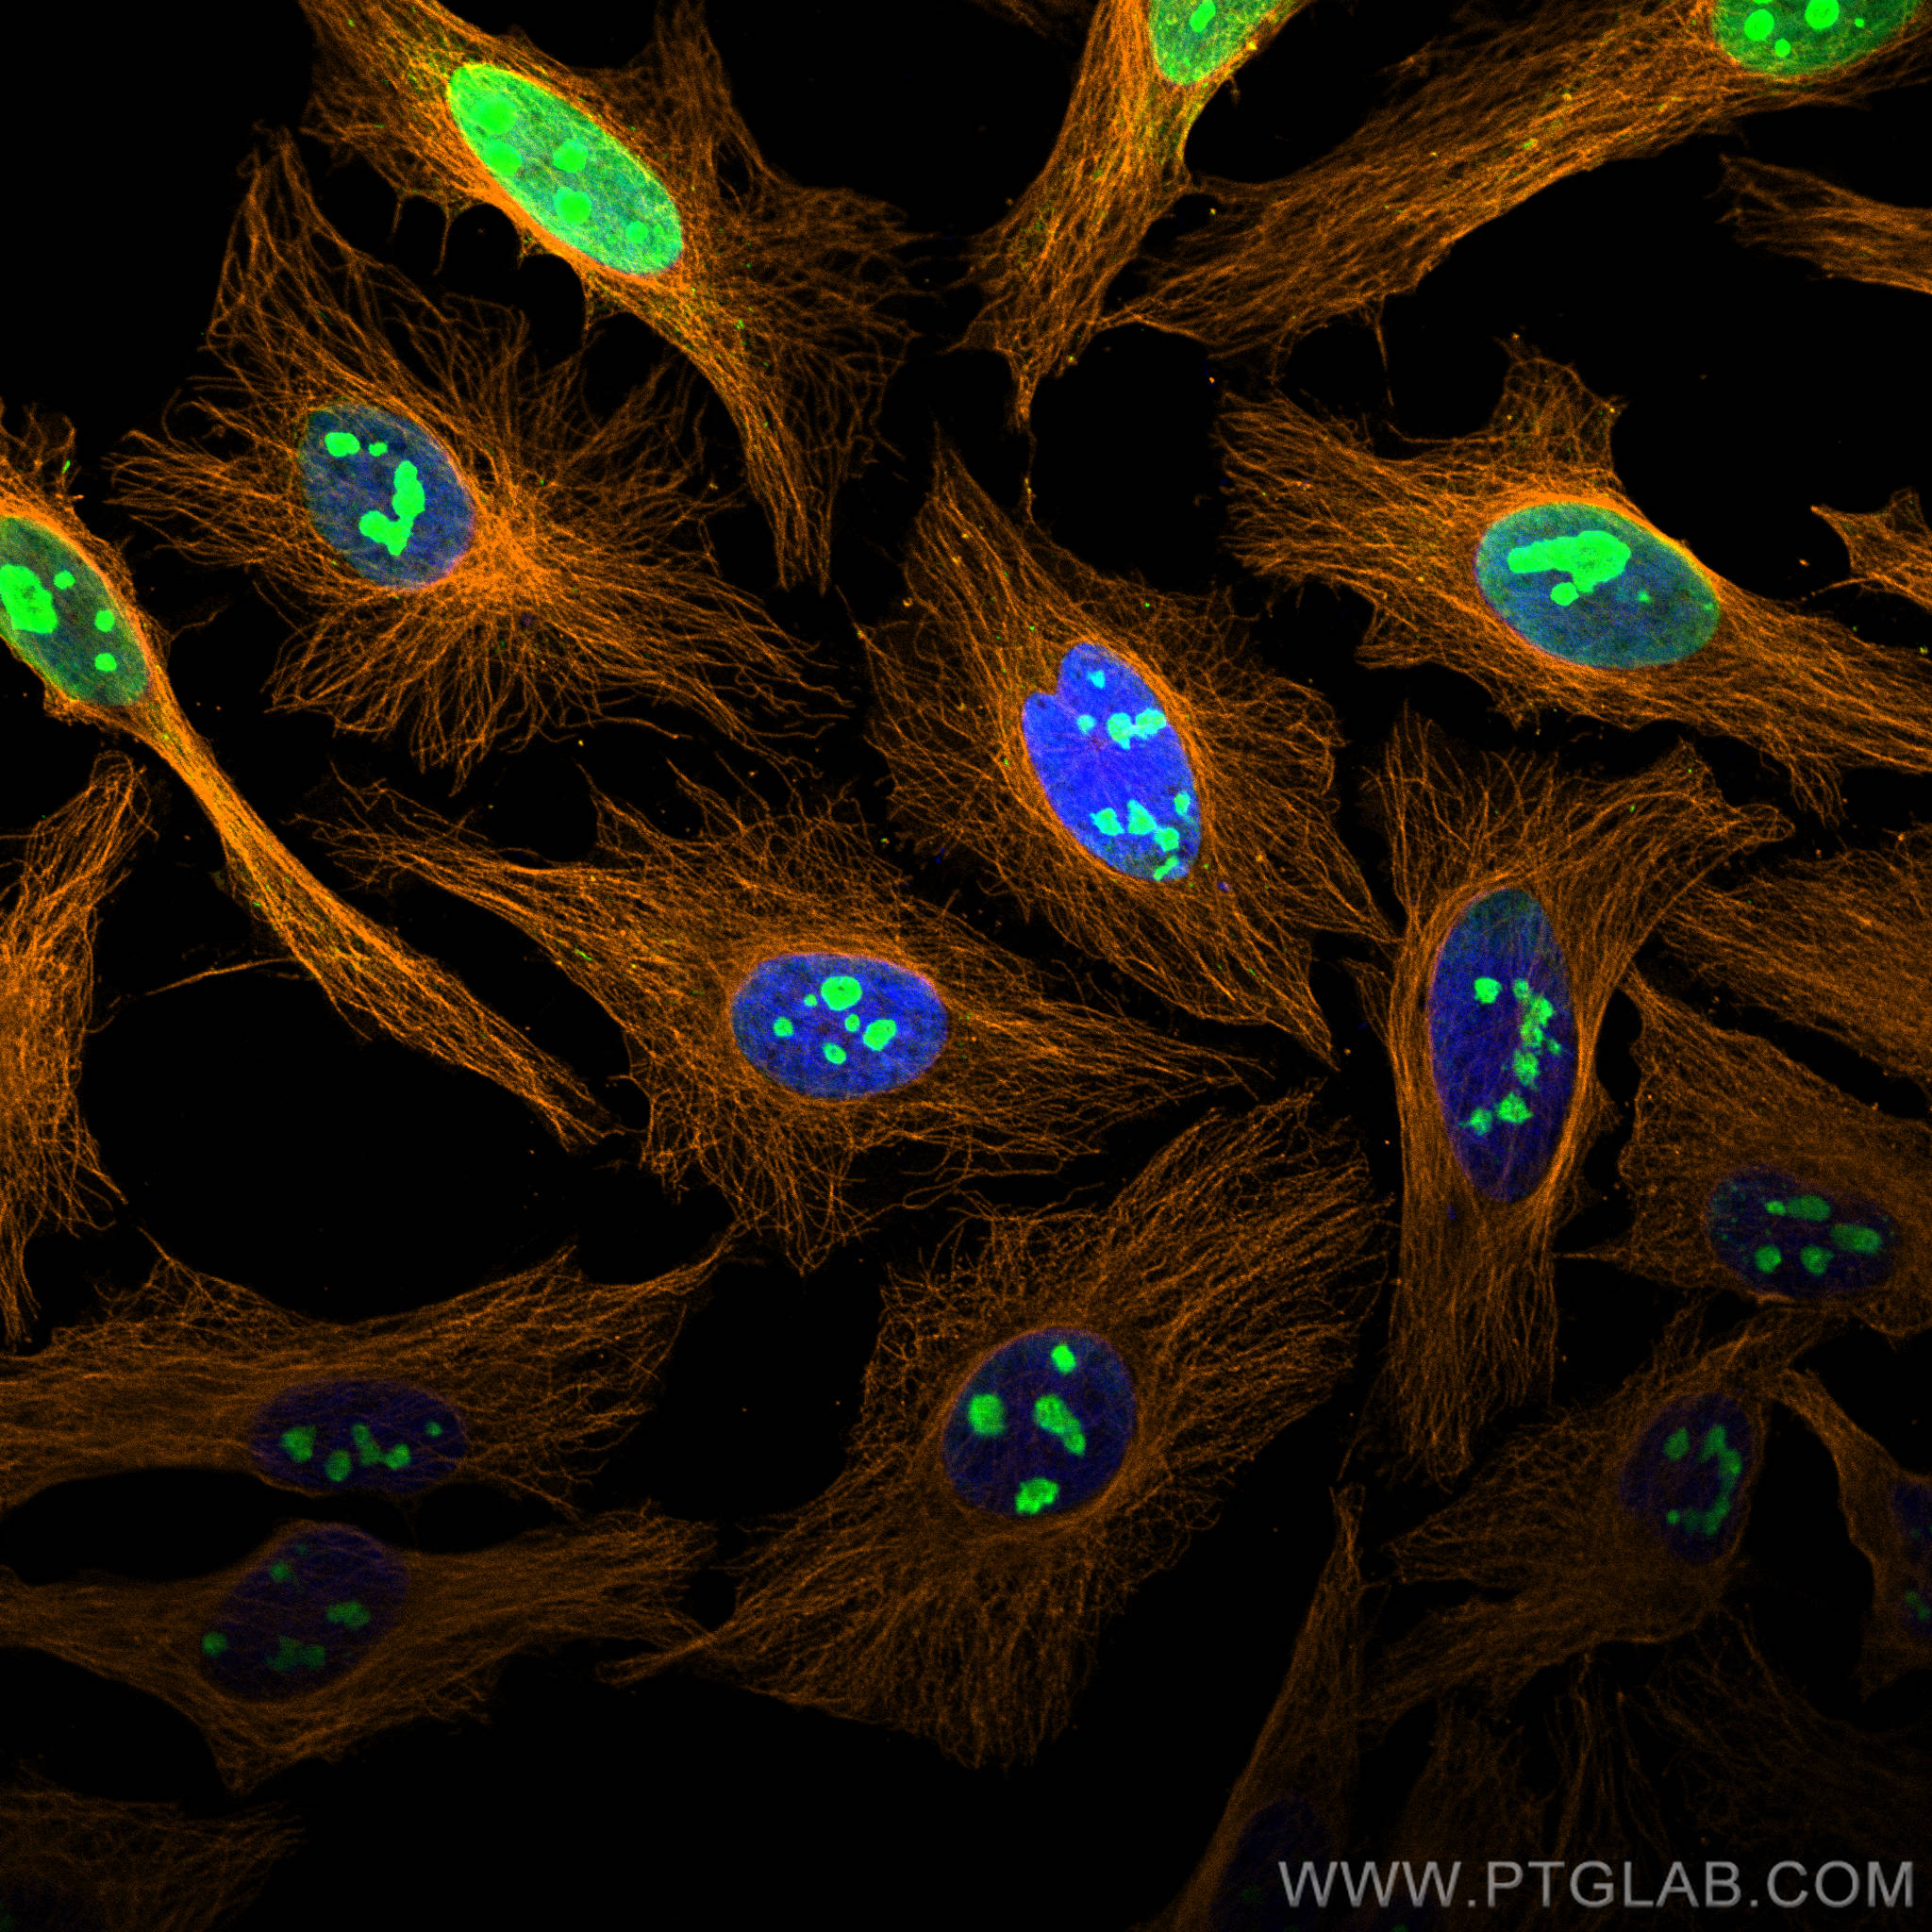 Immunofluorescence of Hela cells: Hela cells were fixed with 4% PFA and stained with Rabbit anti-Alpha Tubulin polyclonal antibody (11224-1-AP, 1:200, orange) and mouse anti-NPM1 monoclonal antibody (60096-1-Ig, 1:1000, green). Multi-rAb CoraLite® Plus 555-Goat Anti-Rabbit Recombinant Secondary Antibody (H+L) (RGAR003, 1:500) and Multi-rAb CoraLite® Plus 488-Goat Anti-Mouse Recombinant Secondary Antibody (H+L) (RGAM002, 1:500) were used for detection. 